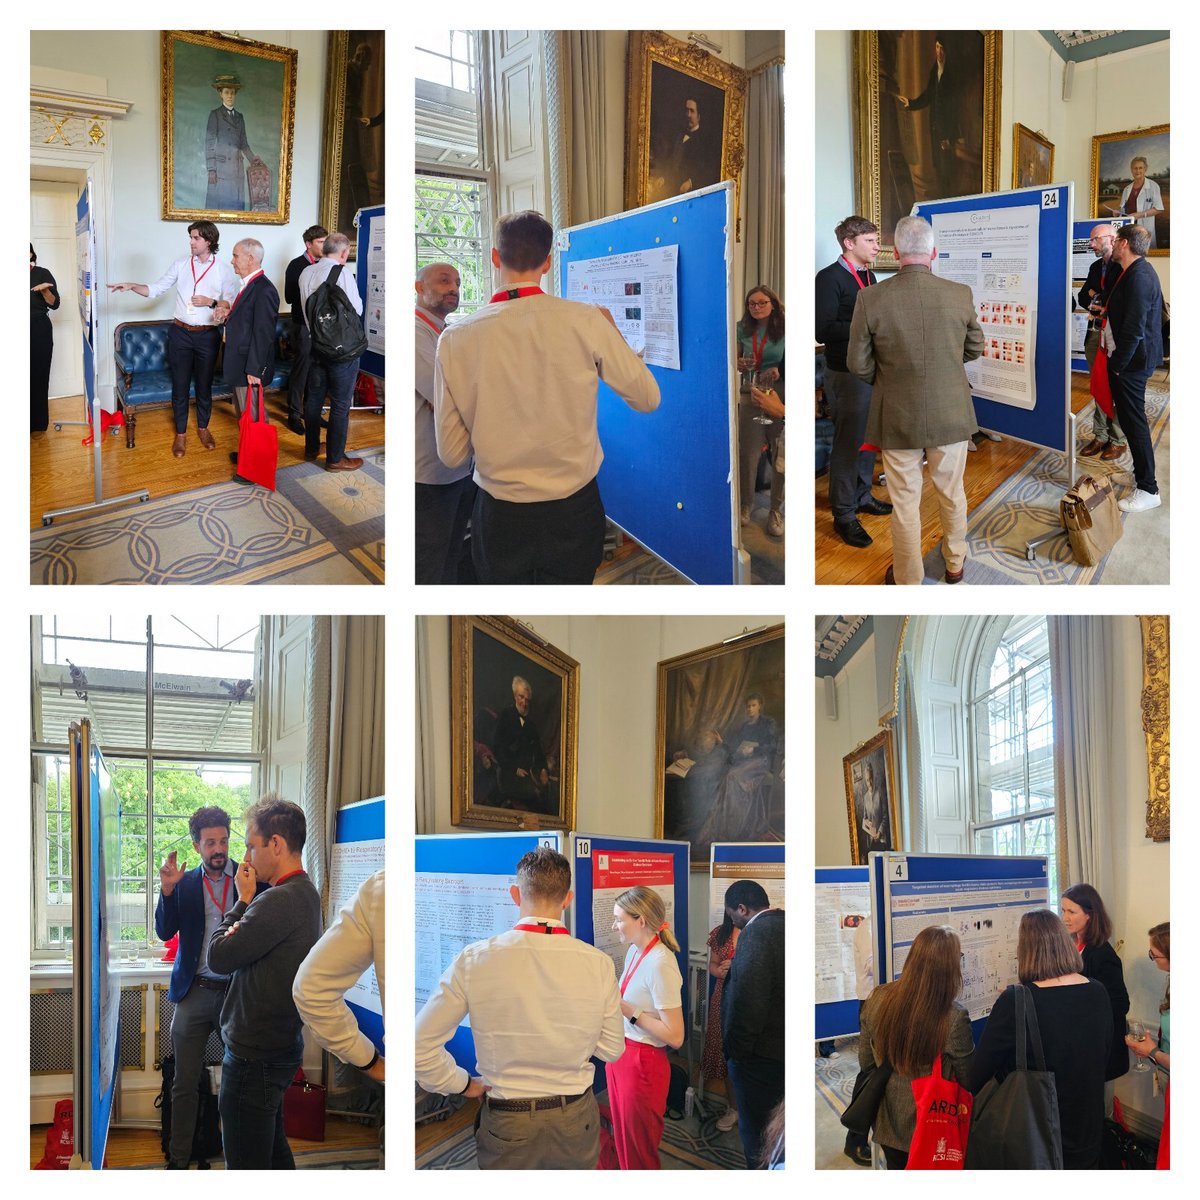 Ending the 1st day with our poster presentation reception. Great enthusiasm from our poster presenters and engagement from delegates. #ARDSDublin